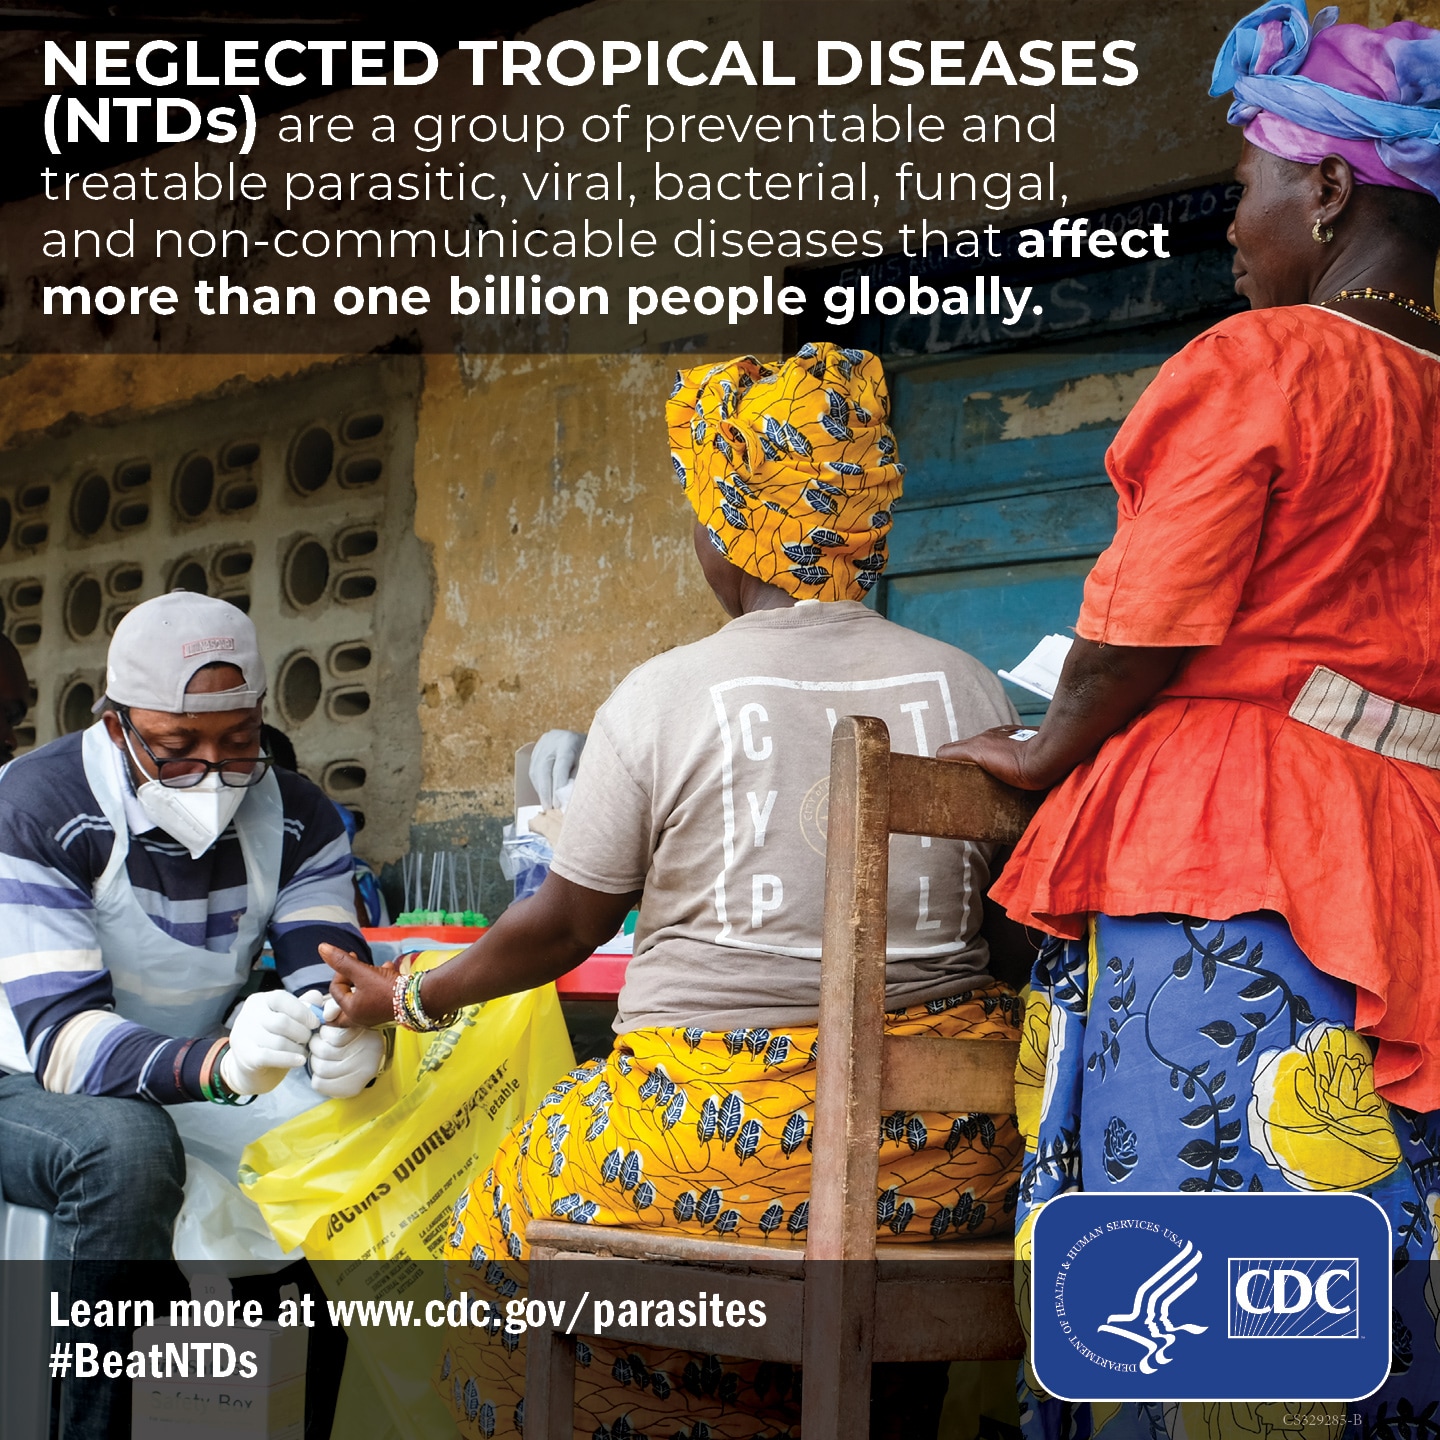 Neglected Tropical Diseases are a group of preventable and treatable parasitic, viral, and bacterial diseases that affect more than one billion people globally.